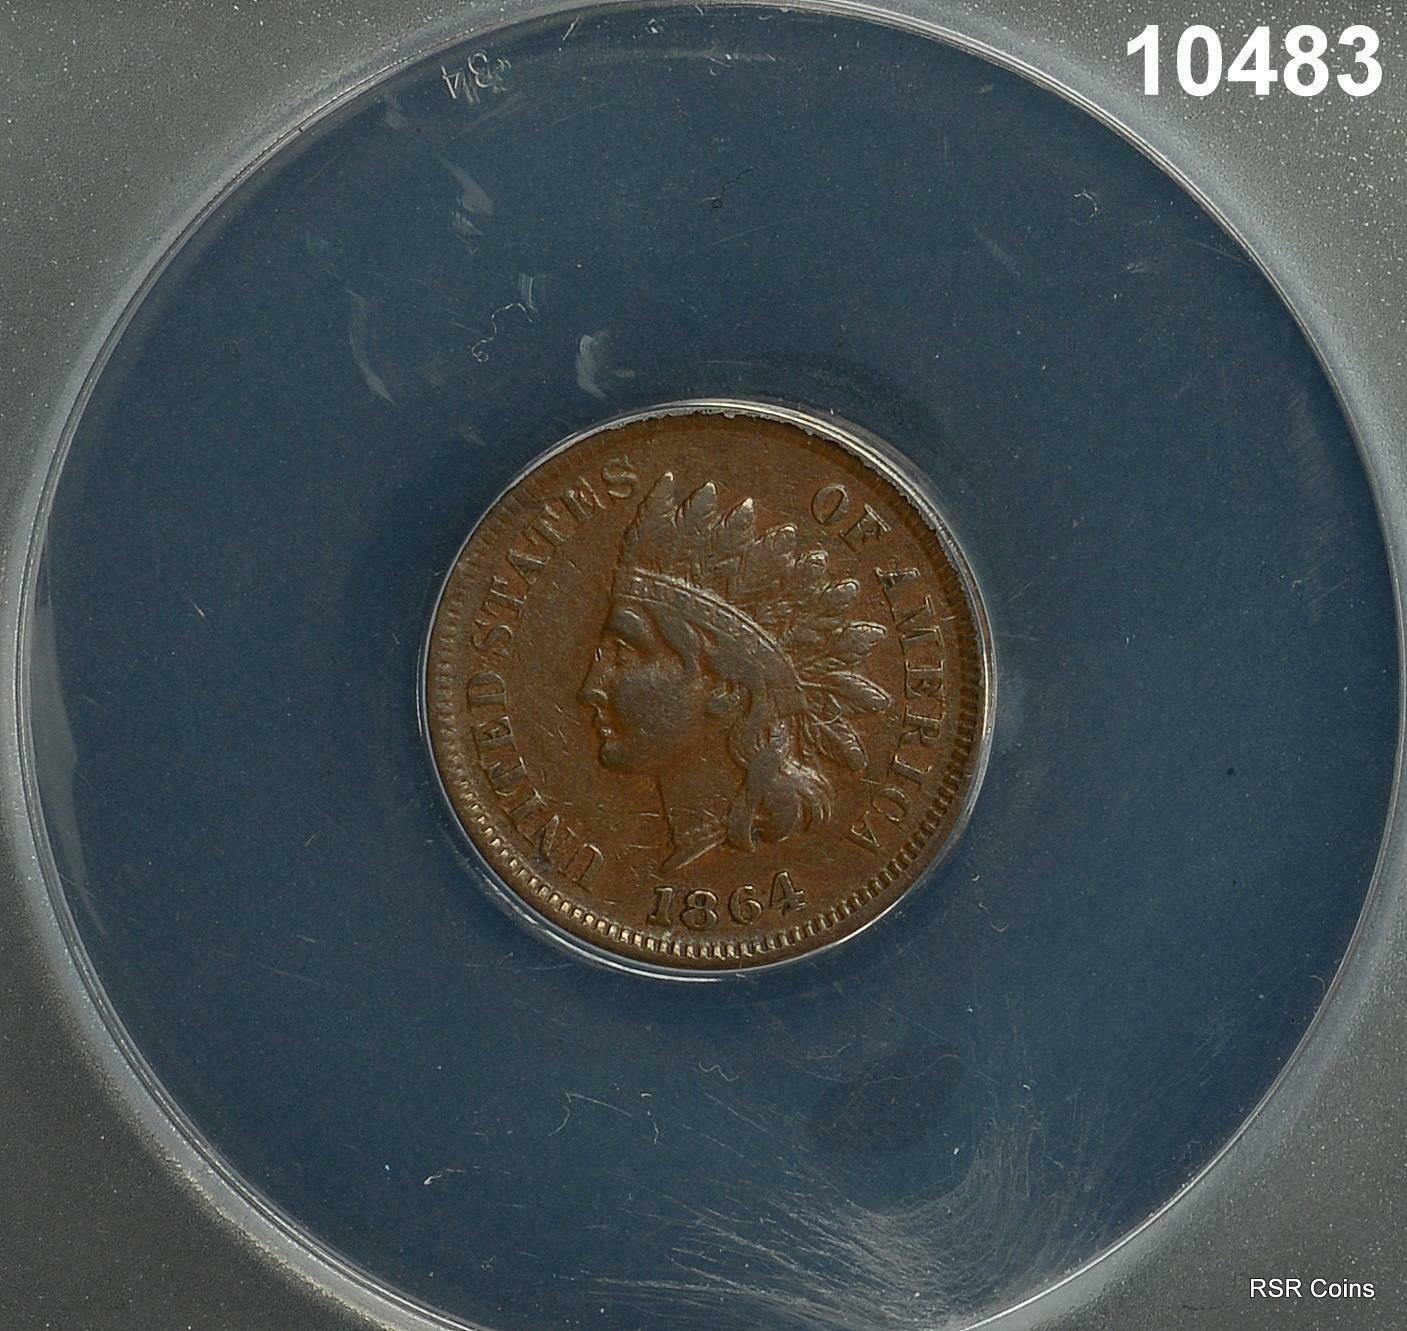 1864 INDIAN CENT WITH L ANACS CERTIFIED VF30 SCARCE!! #10483